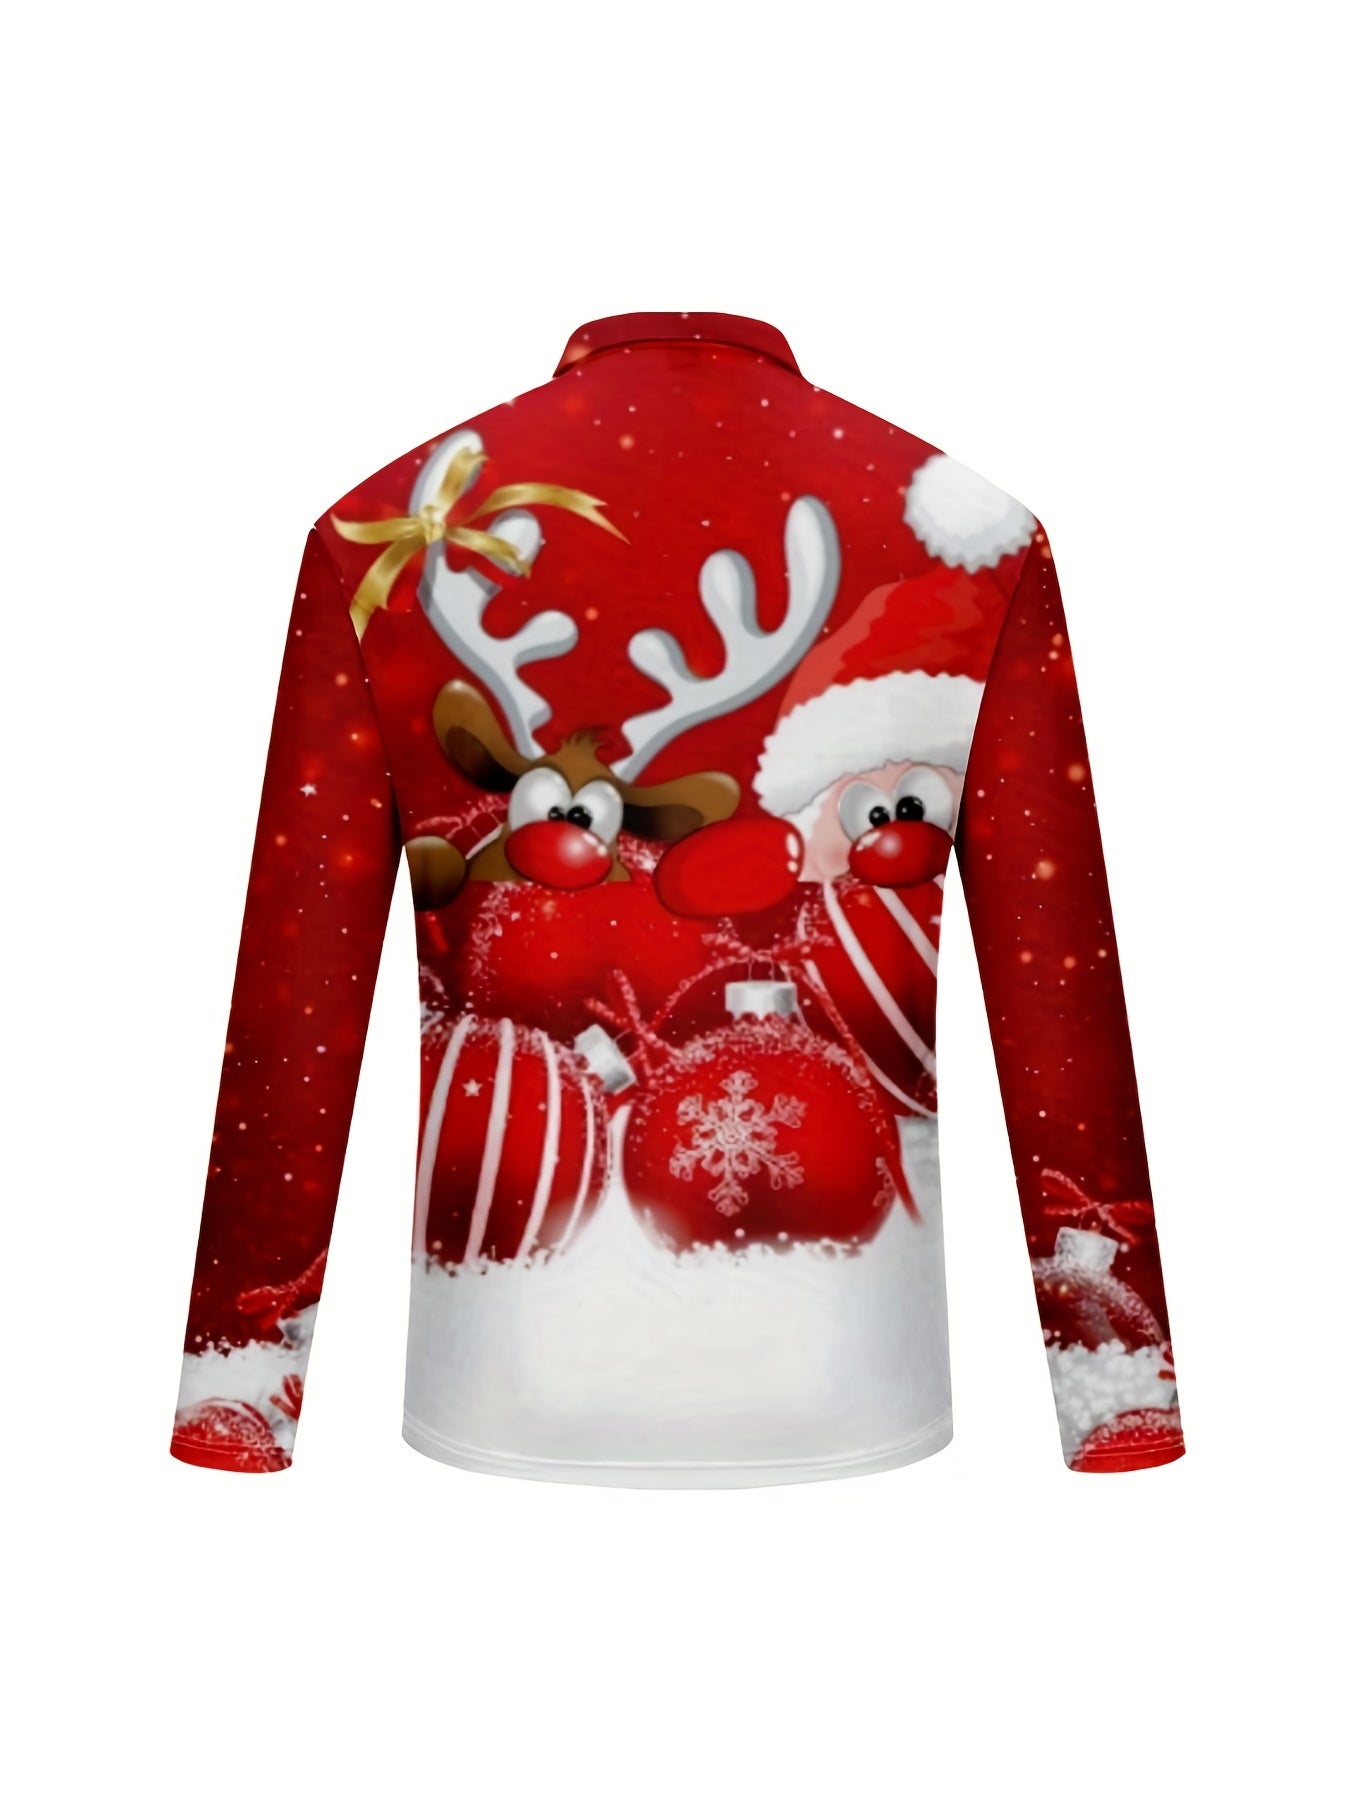 Christmas Print Men's Casual Button Up Long Sleeve Lightweight Shirt, Men's top For Spring Fall, Tops For Men